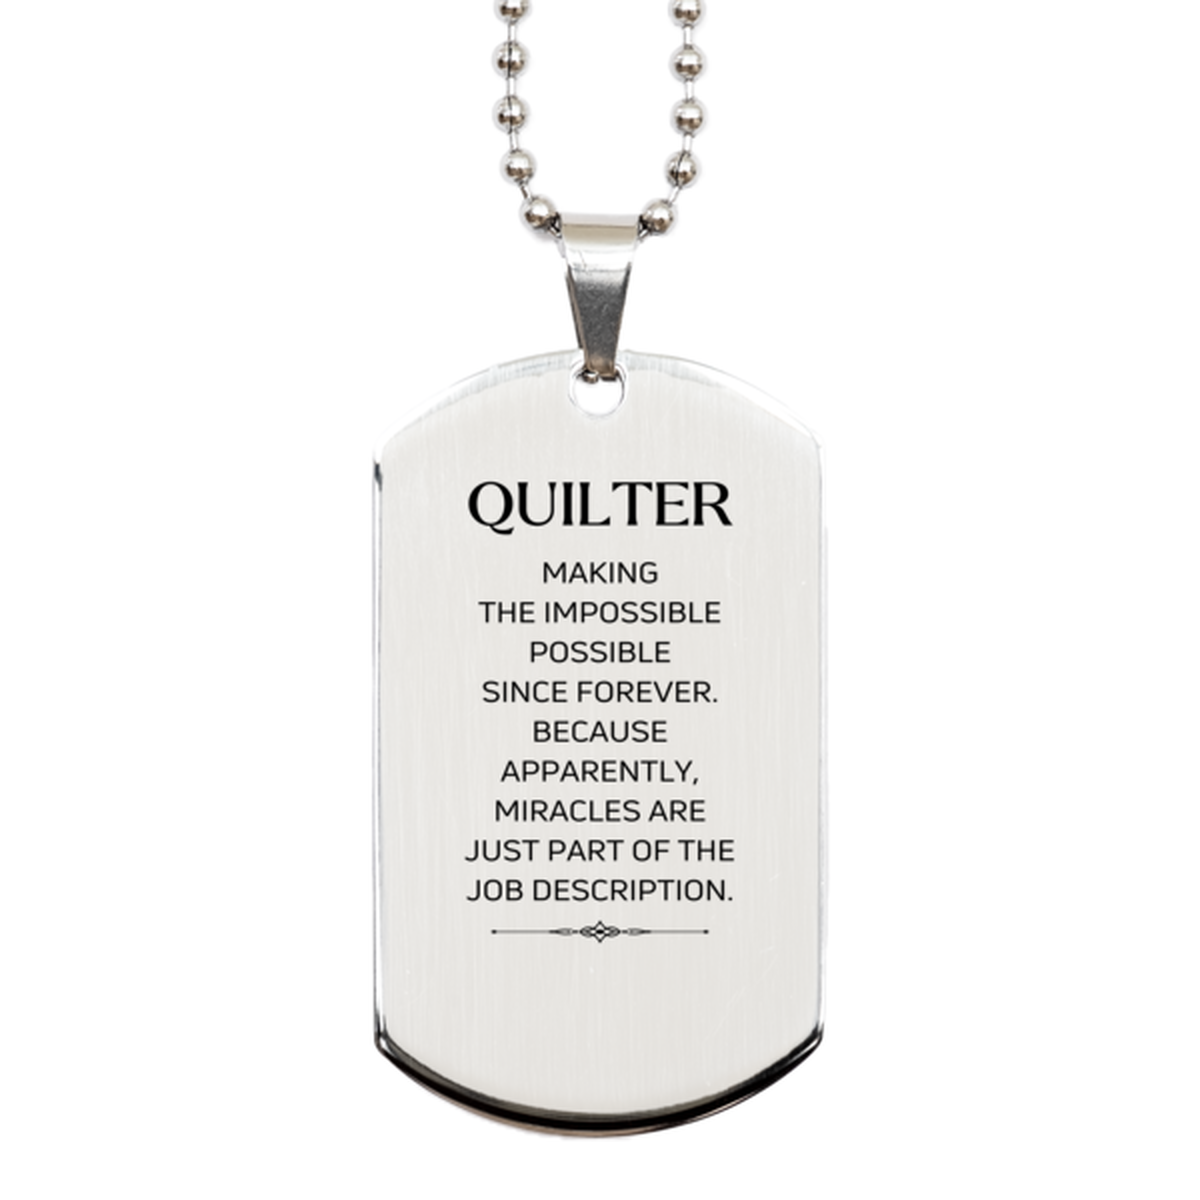 Funny Quilter Gifts, Miracles are just part of the job description, Inspirational Birthday Silver Dog Tag For Quilter, Men, Women, Coworkers, Friends, Boss